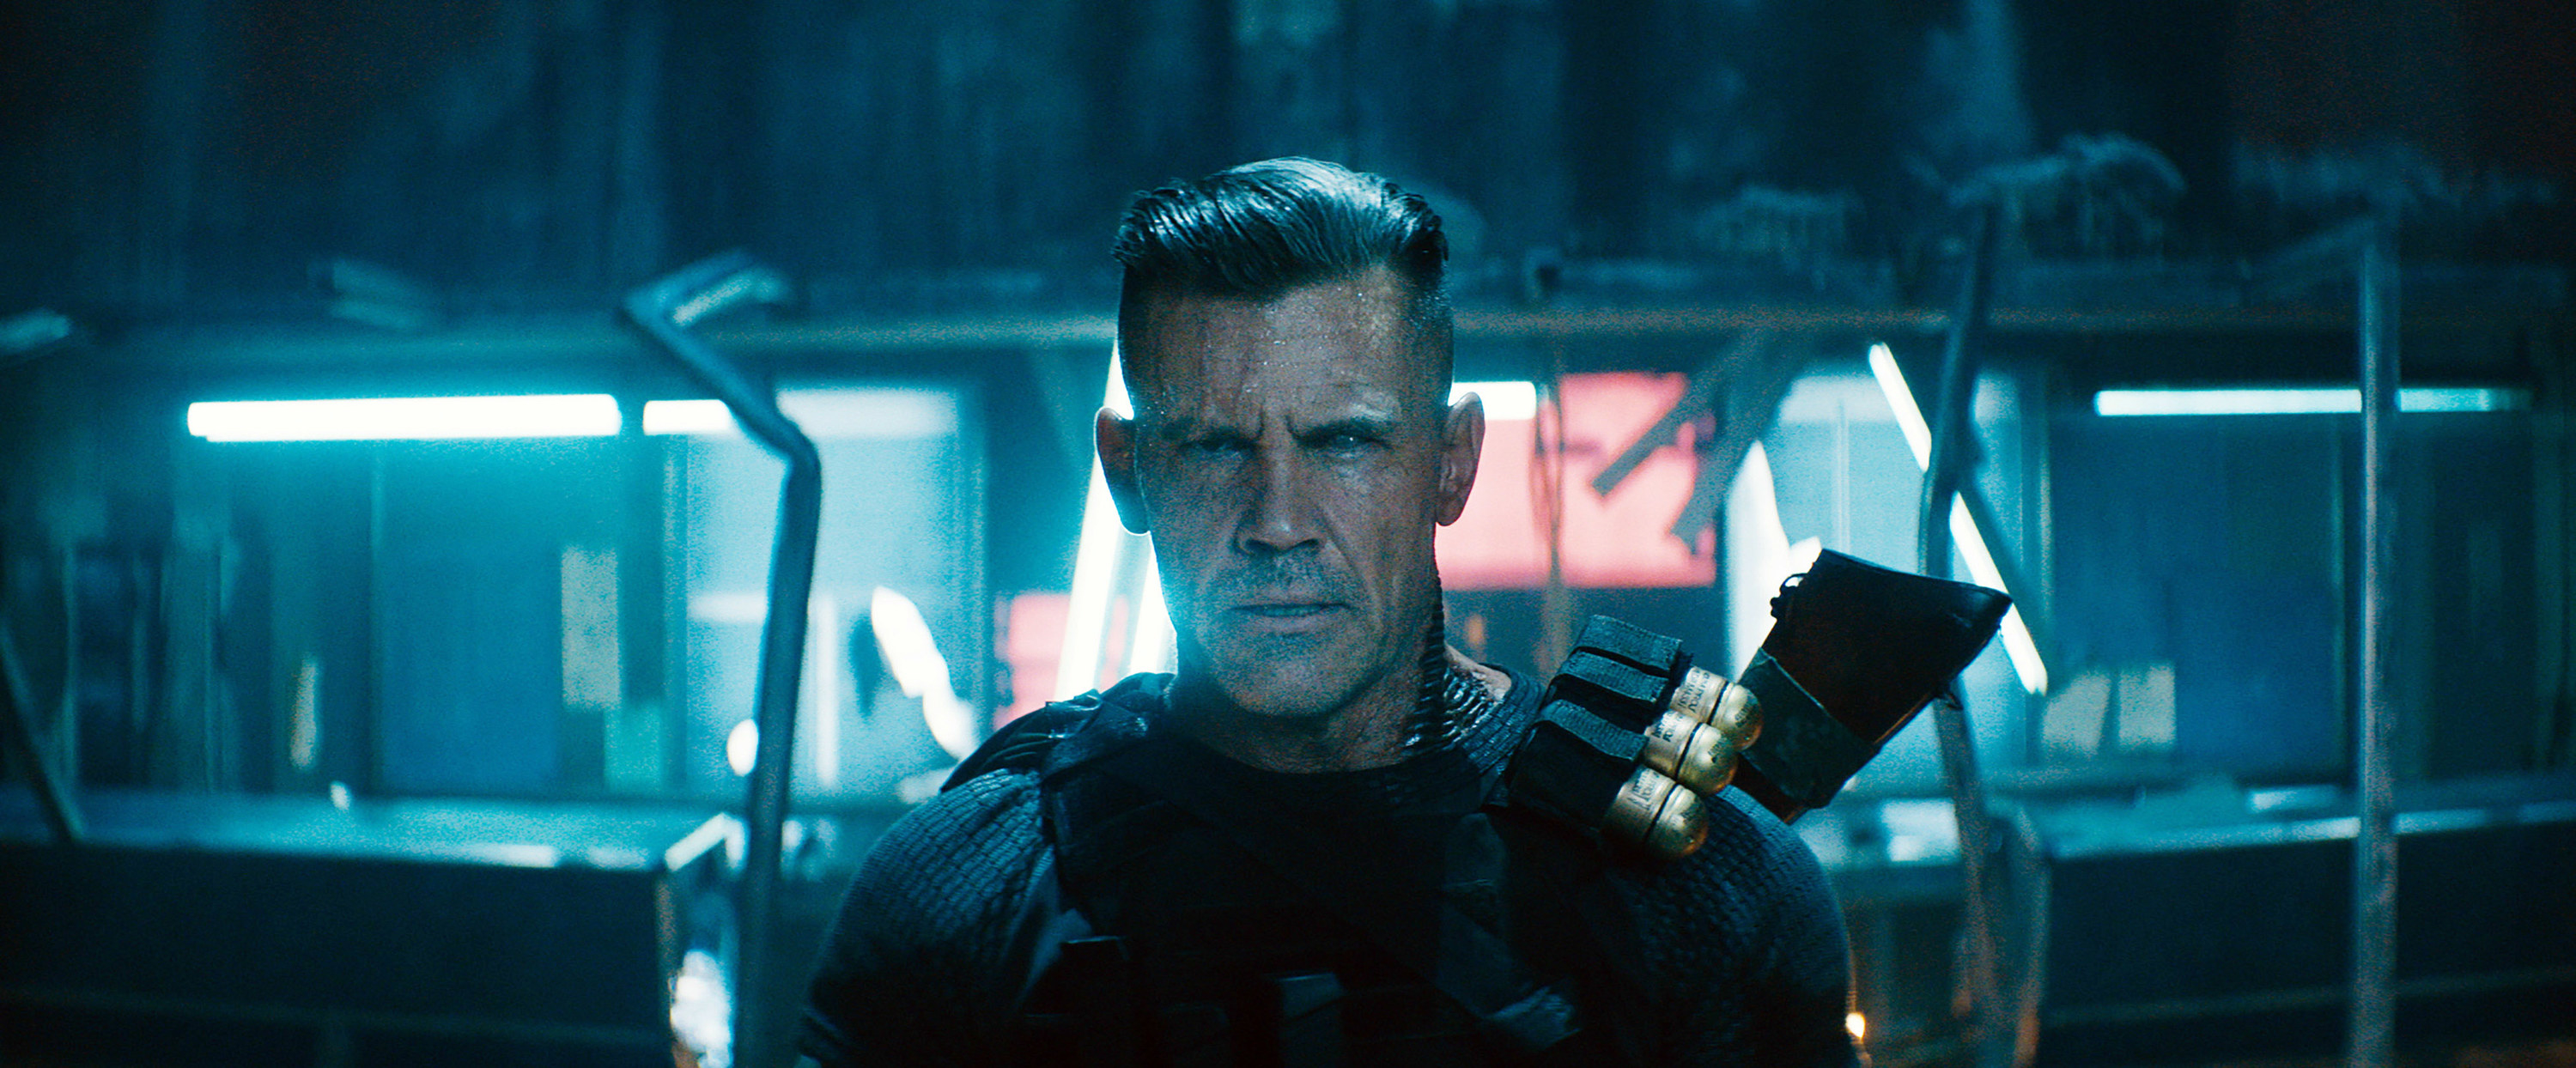 wearing his weapons, Cable stares directly into the camera